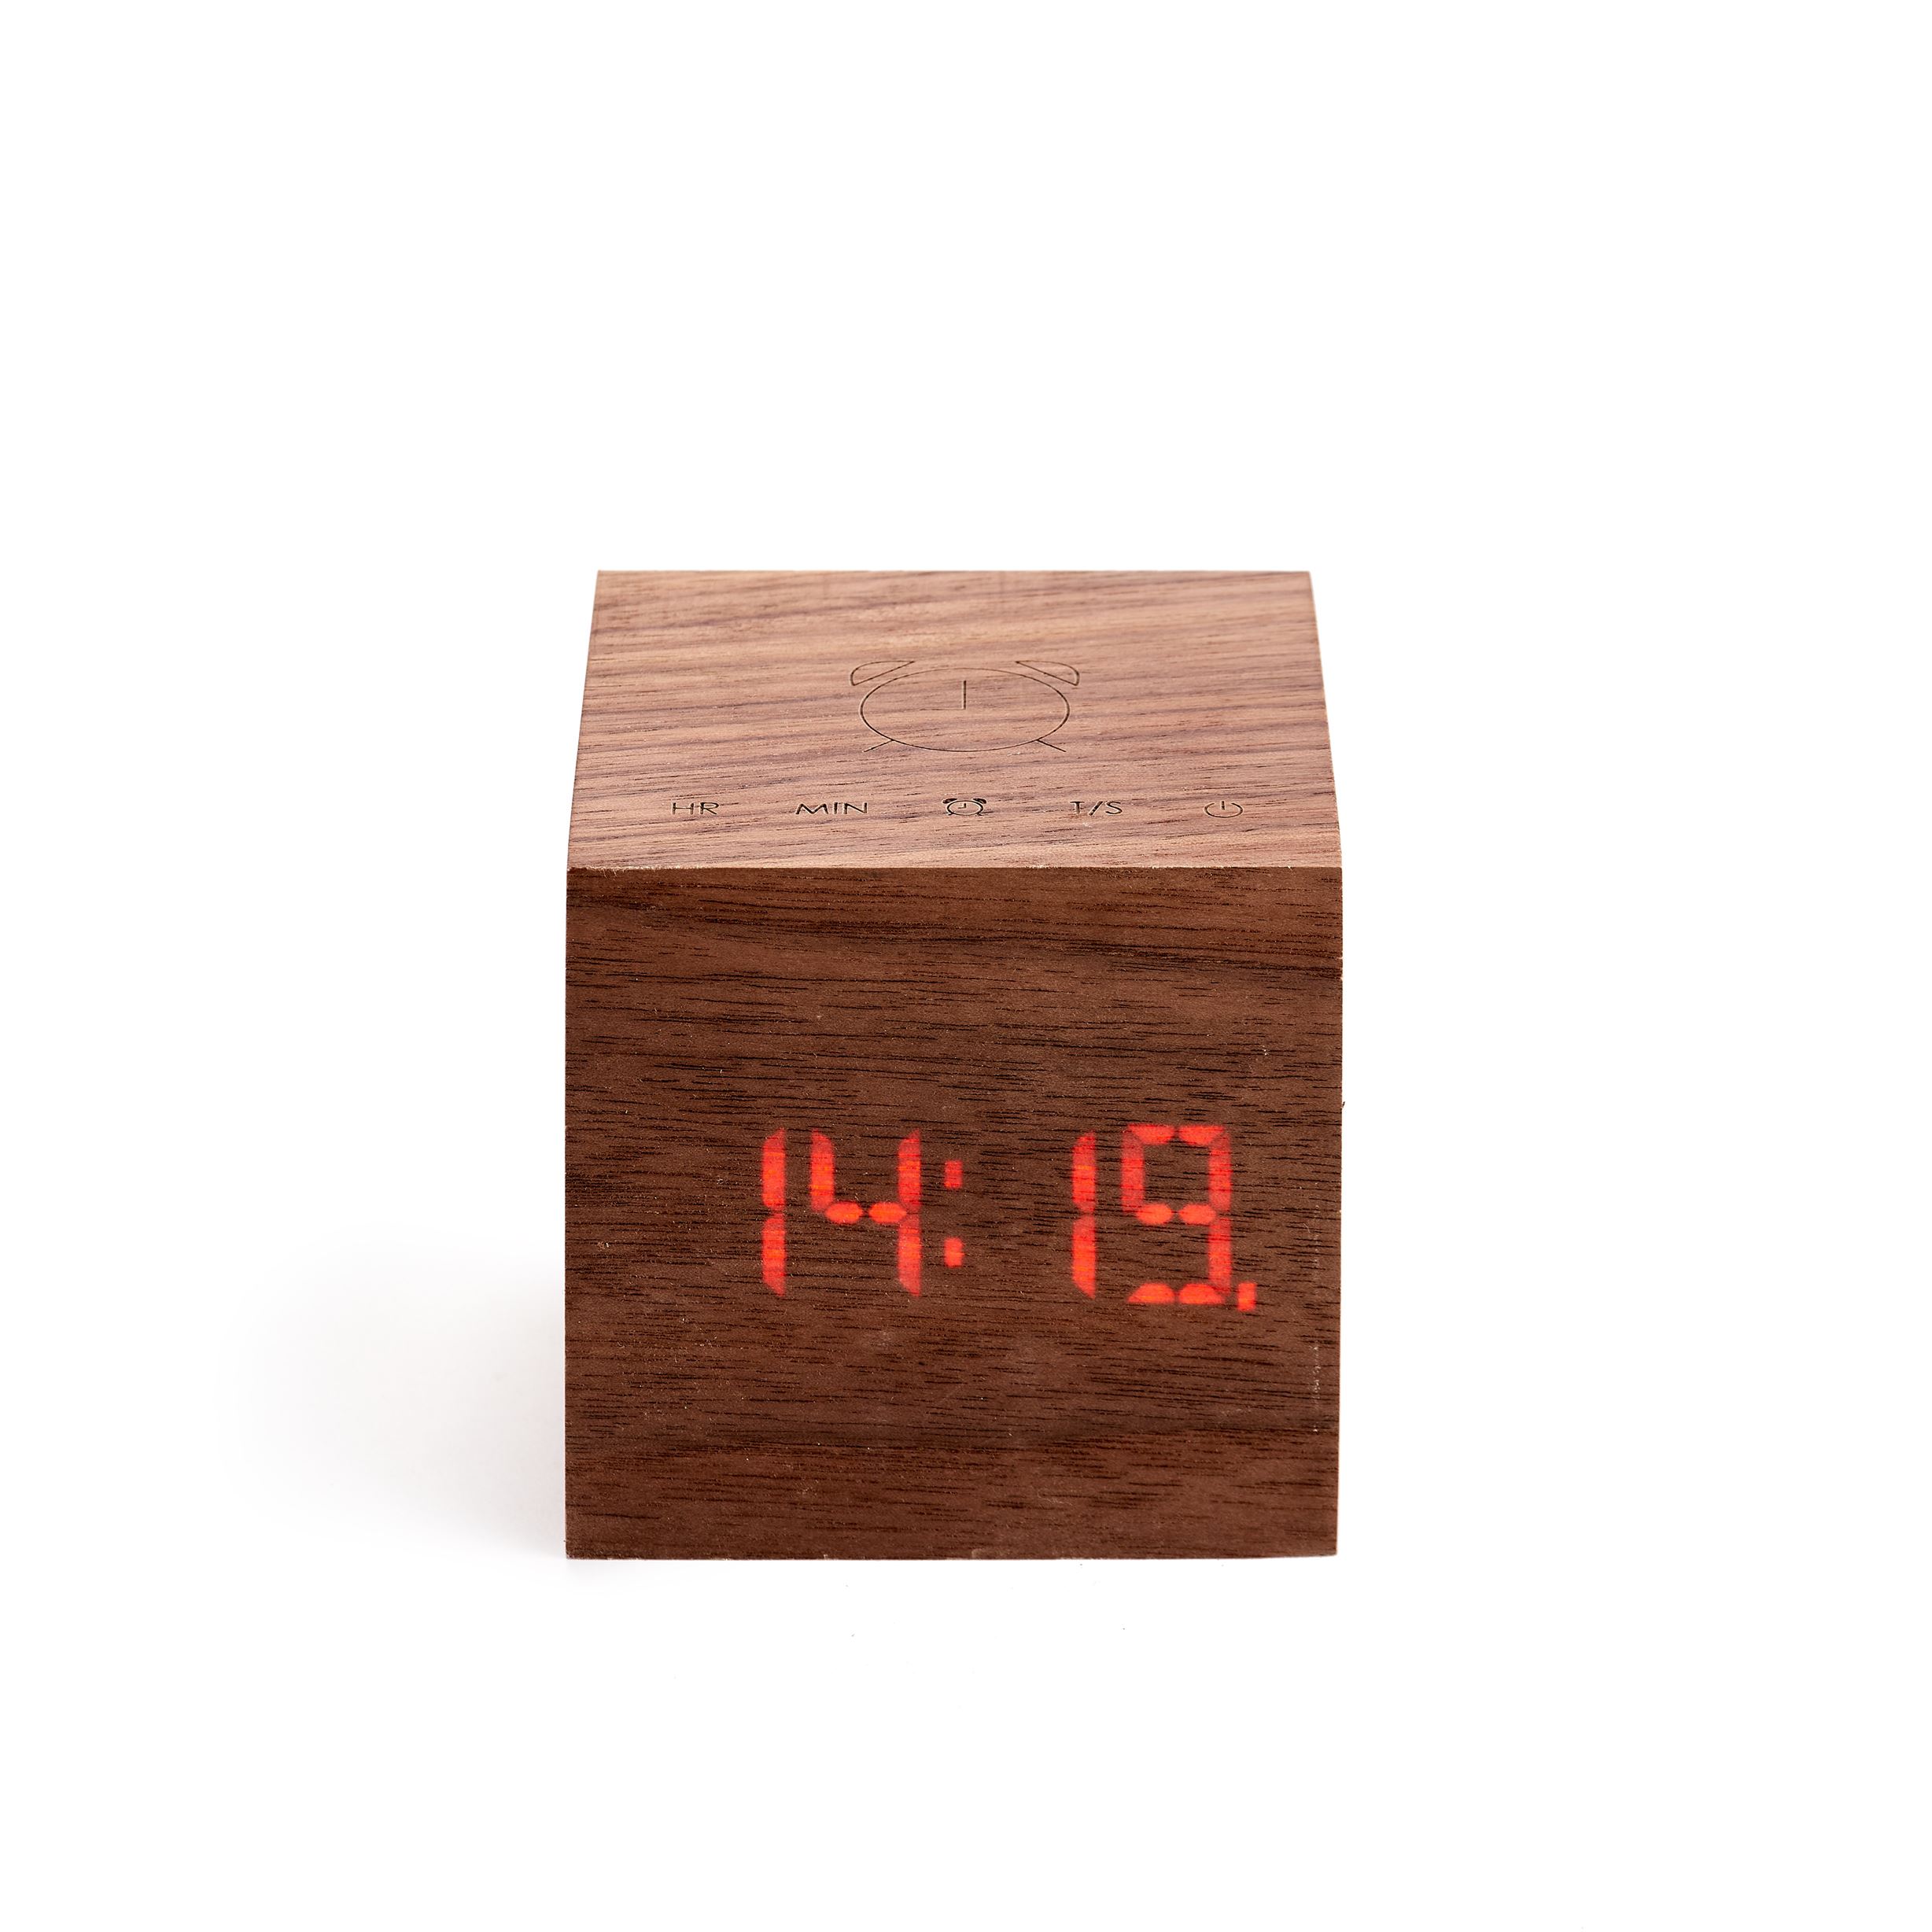 Gingko Cube plus clock in walnut wood floating RED LED Display